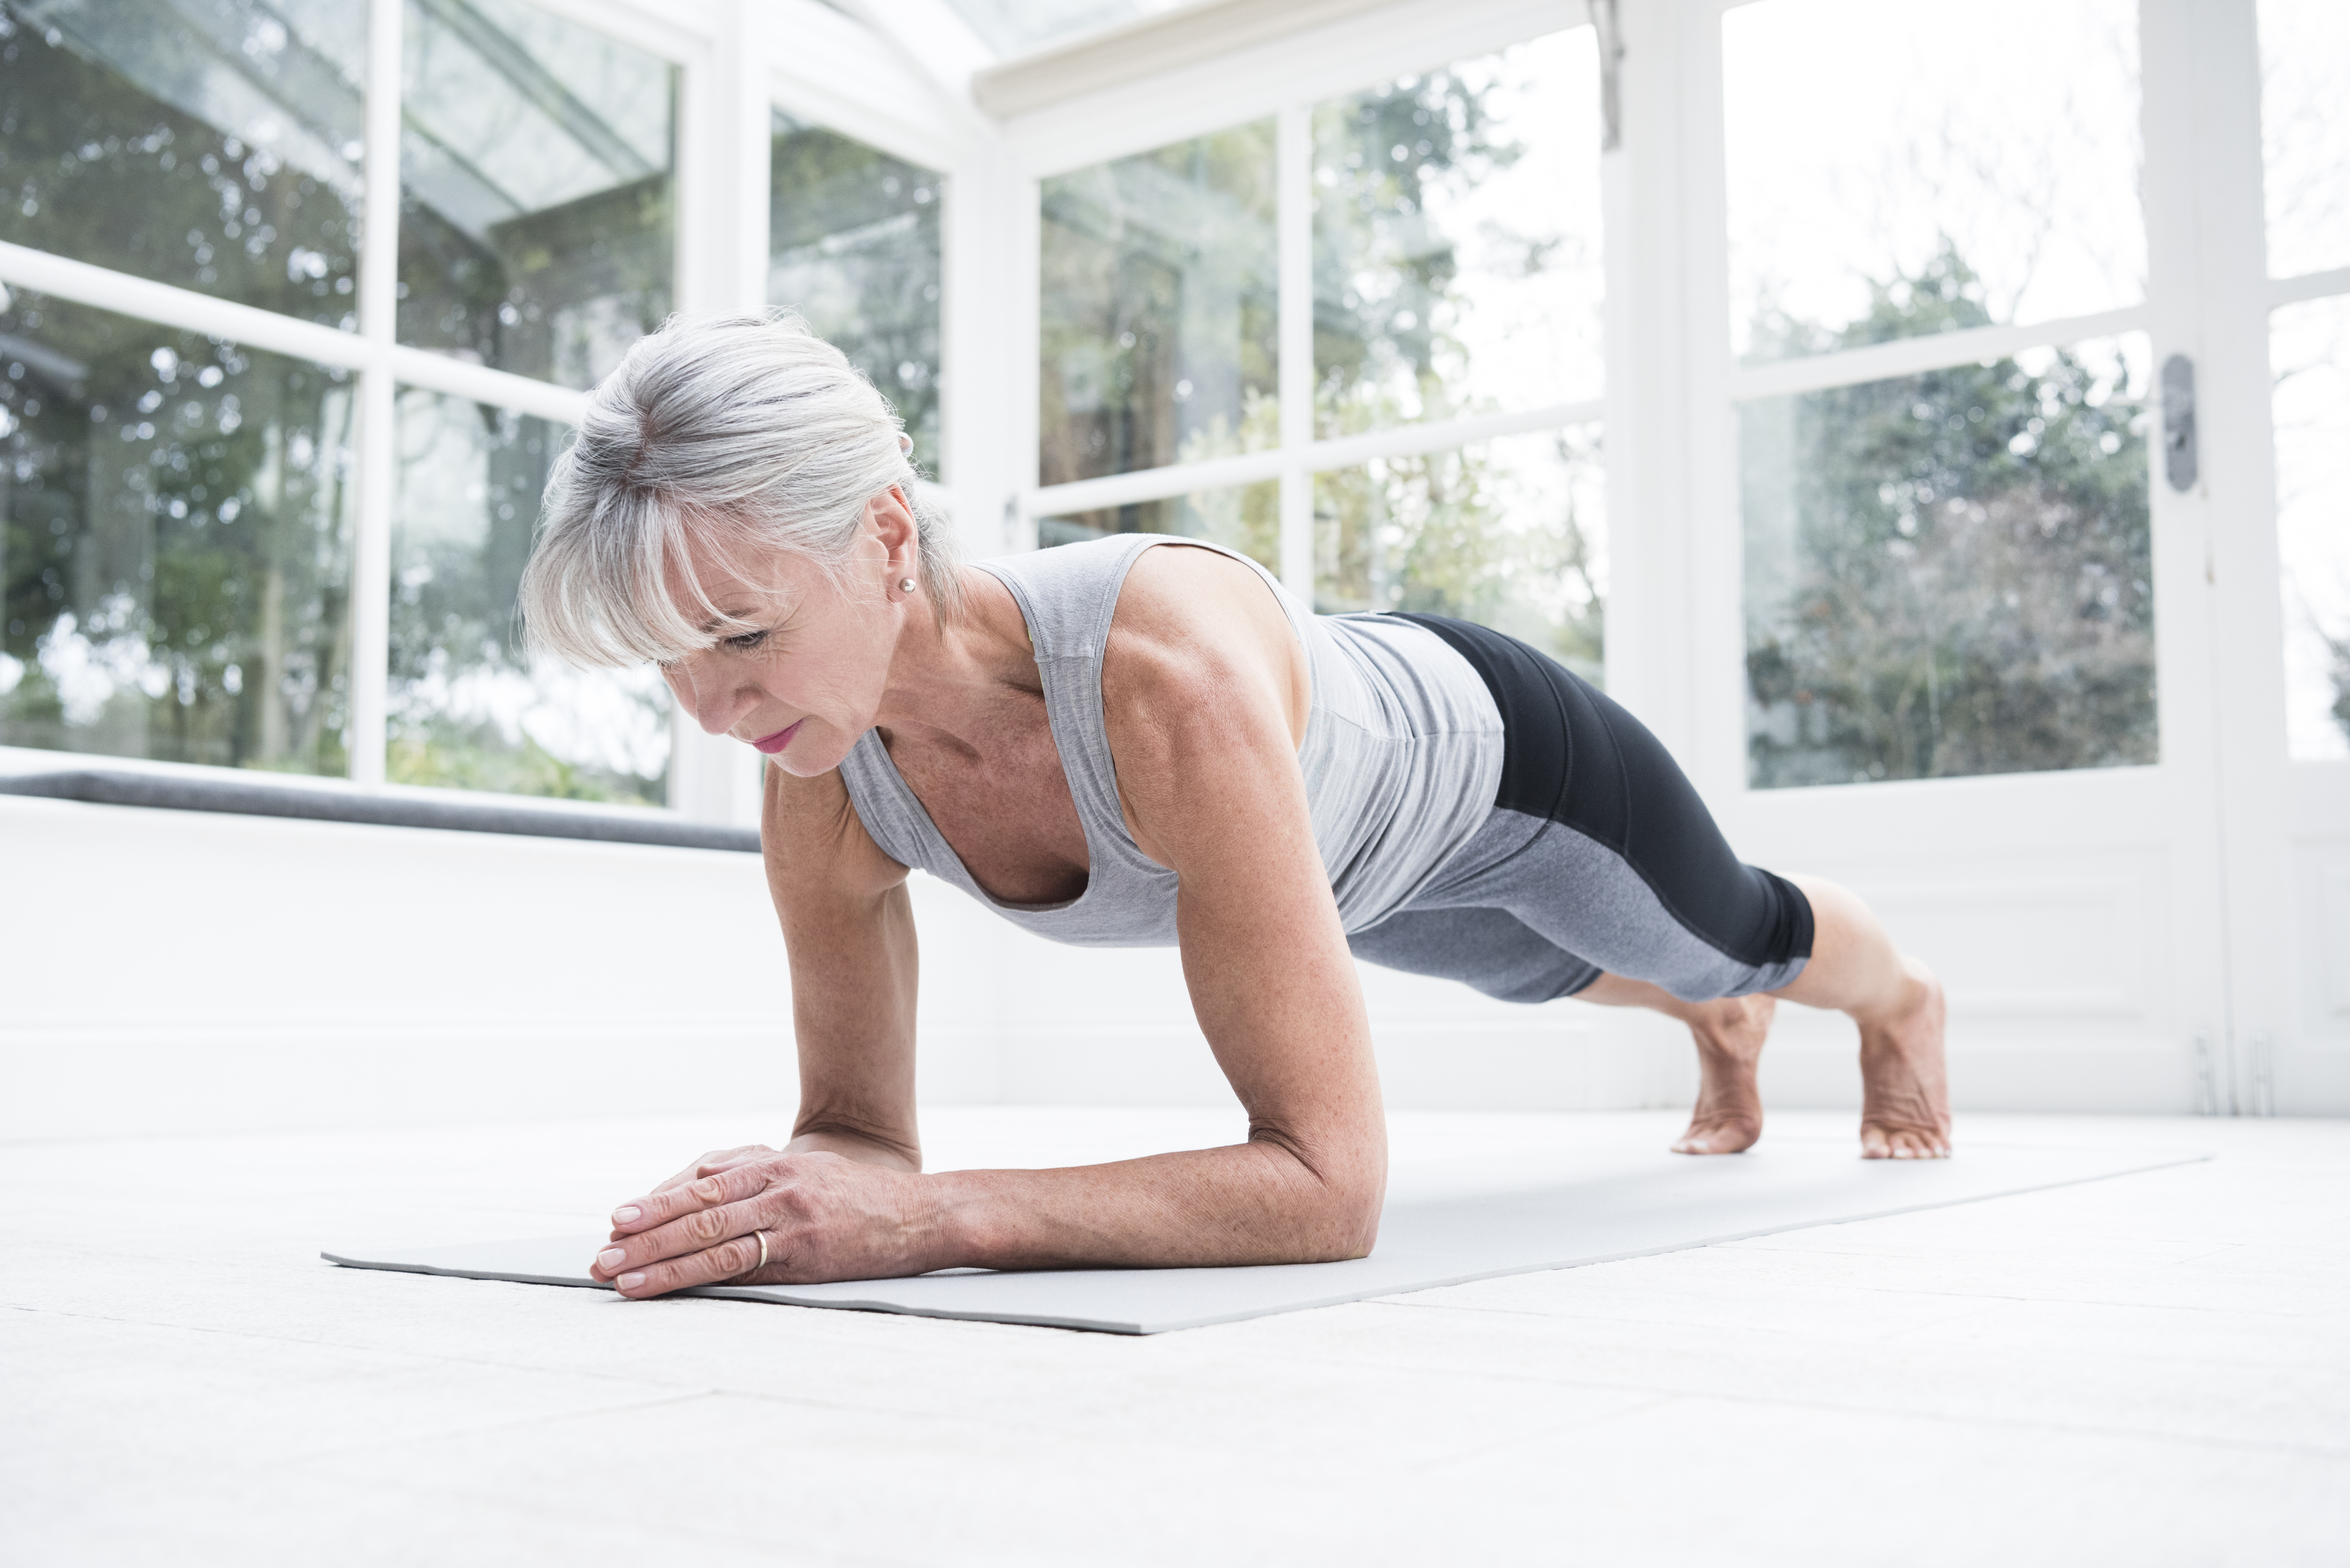 A Diet & Exercise Plan for a 60-Year-Old Woman